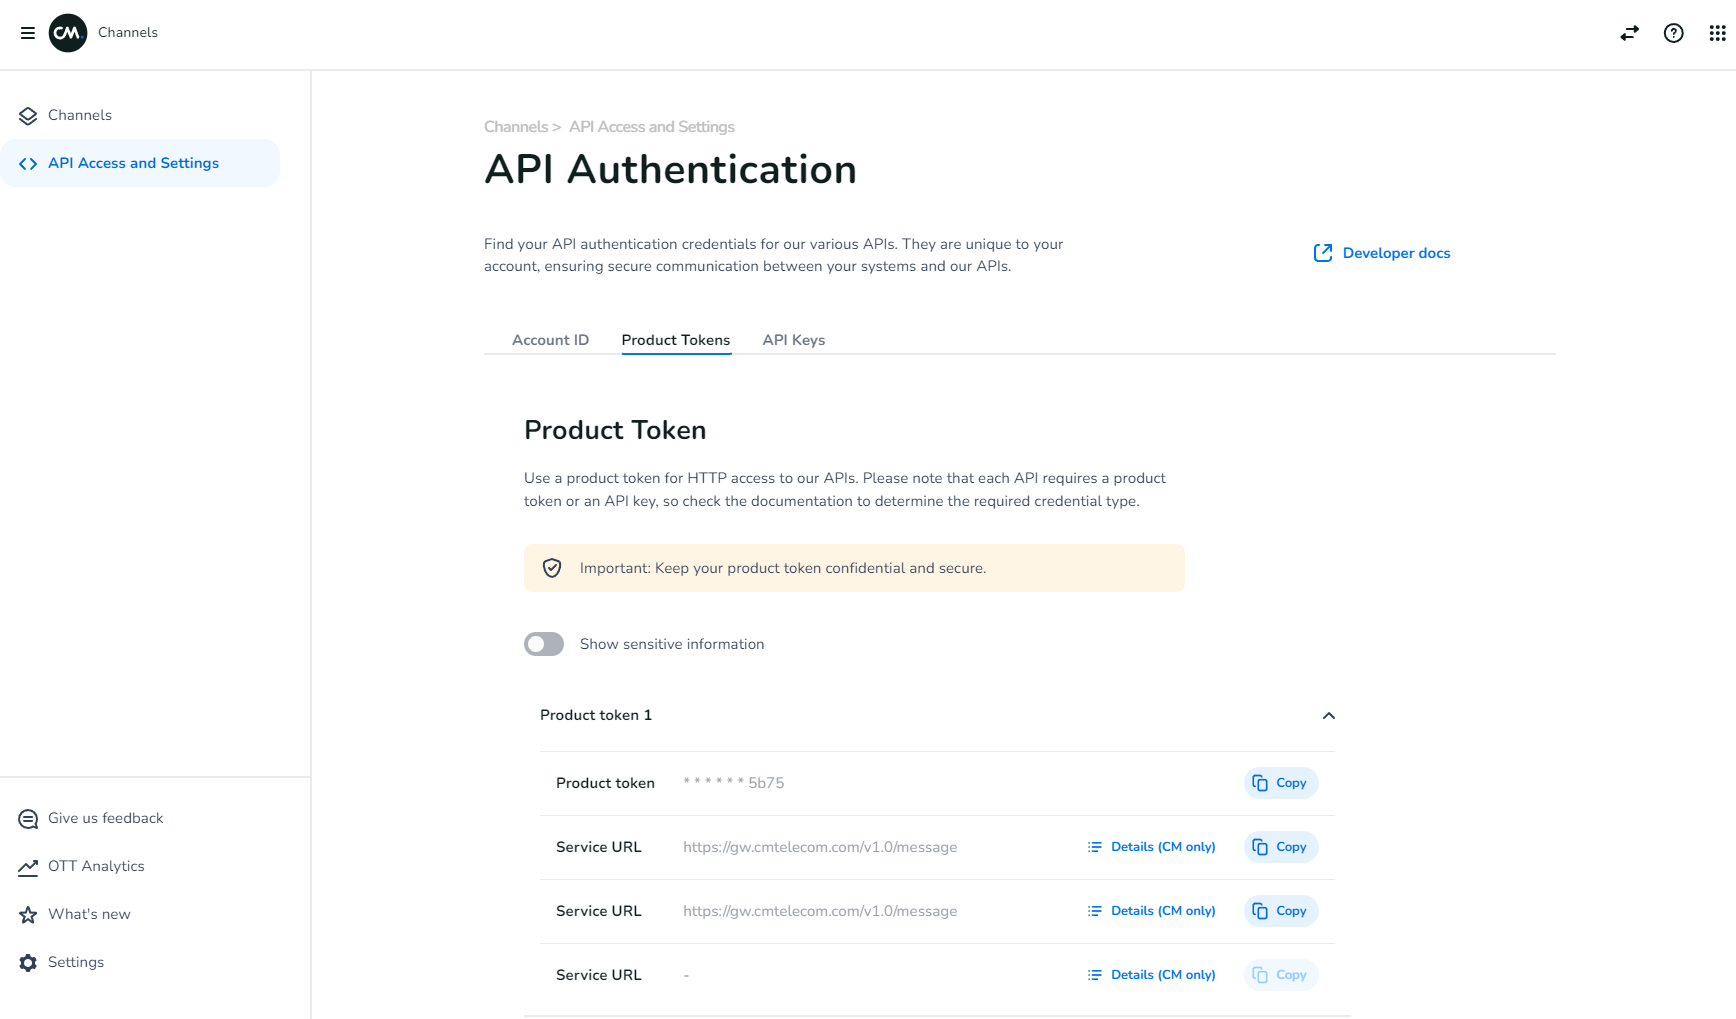 \* Keep your API Keys confidential and secure. Please contact support if this page does not expose any Product Tokens.